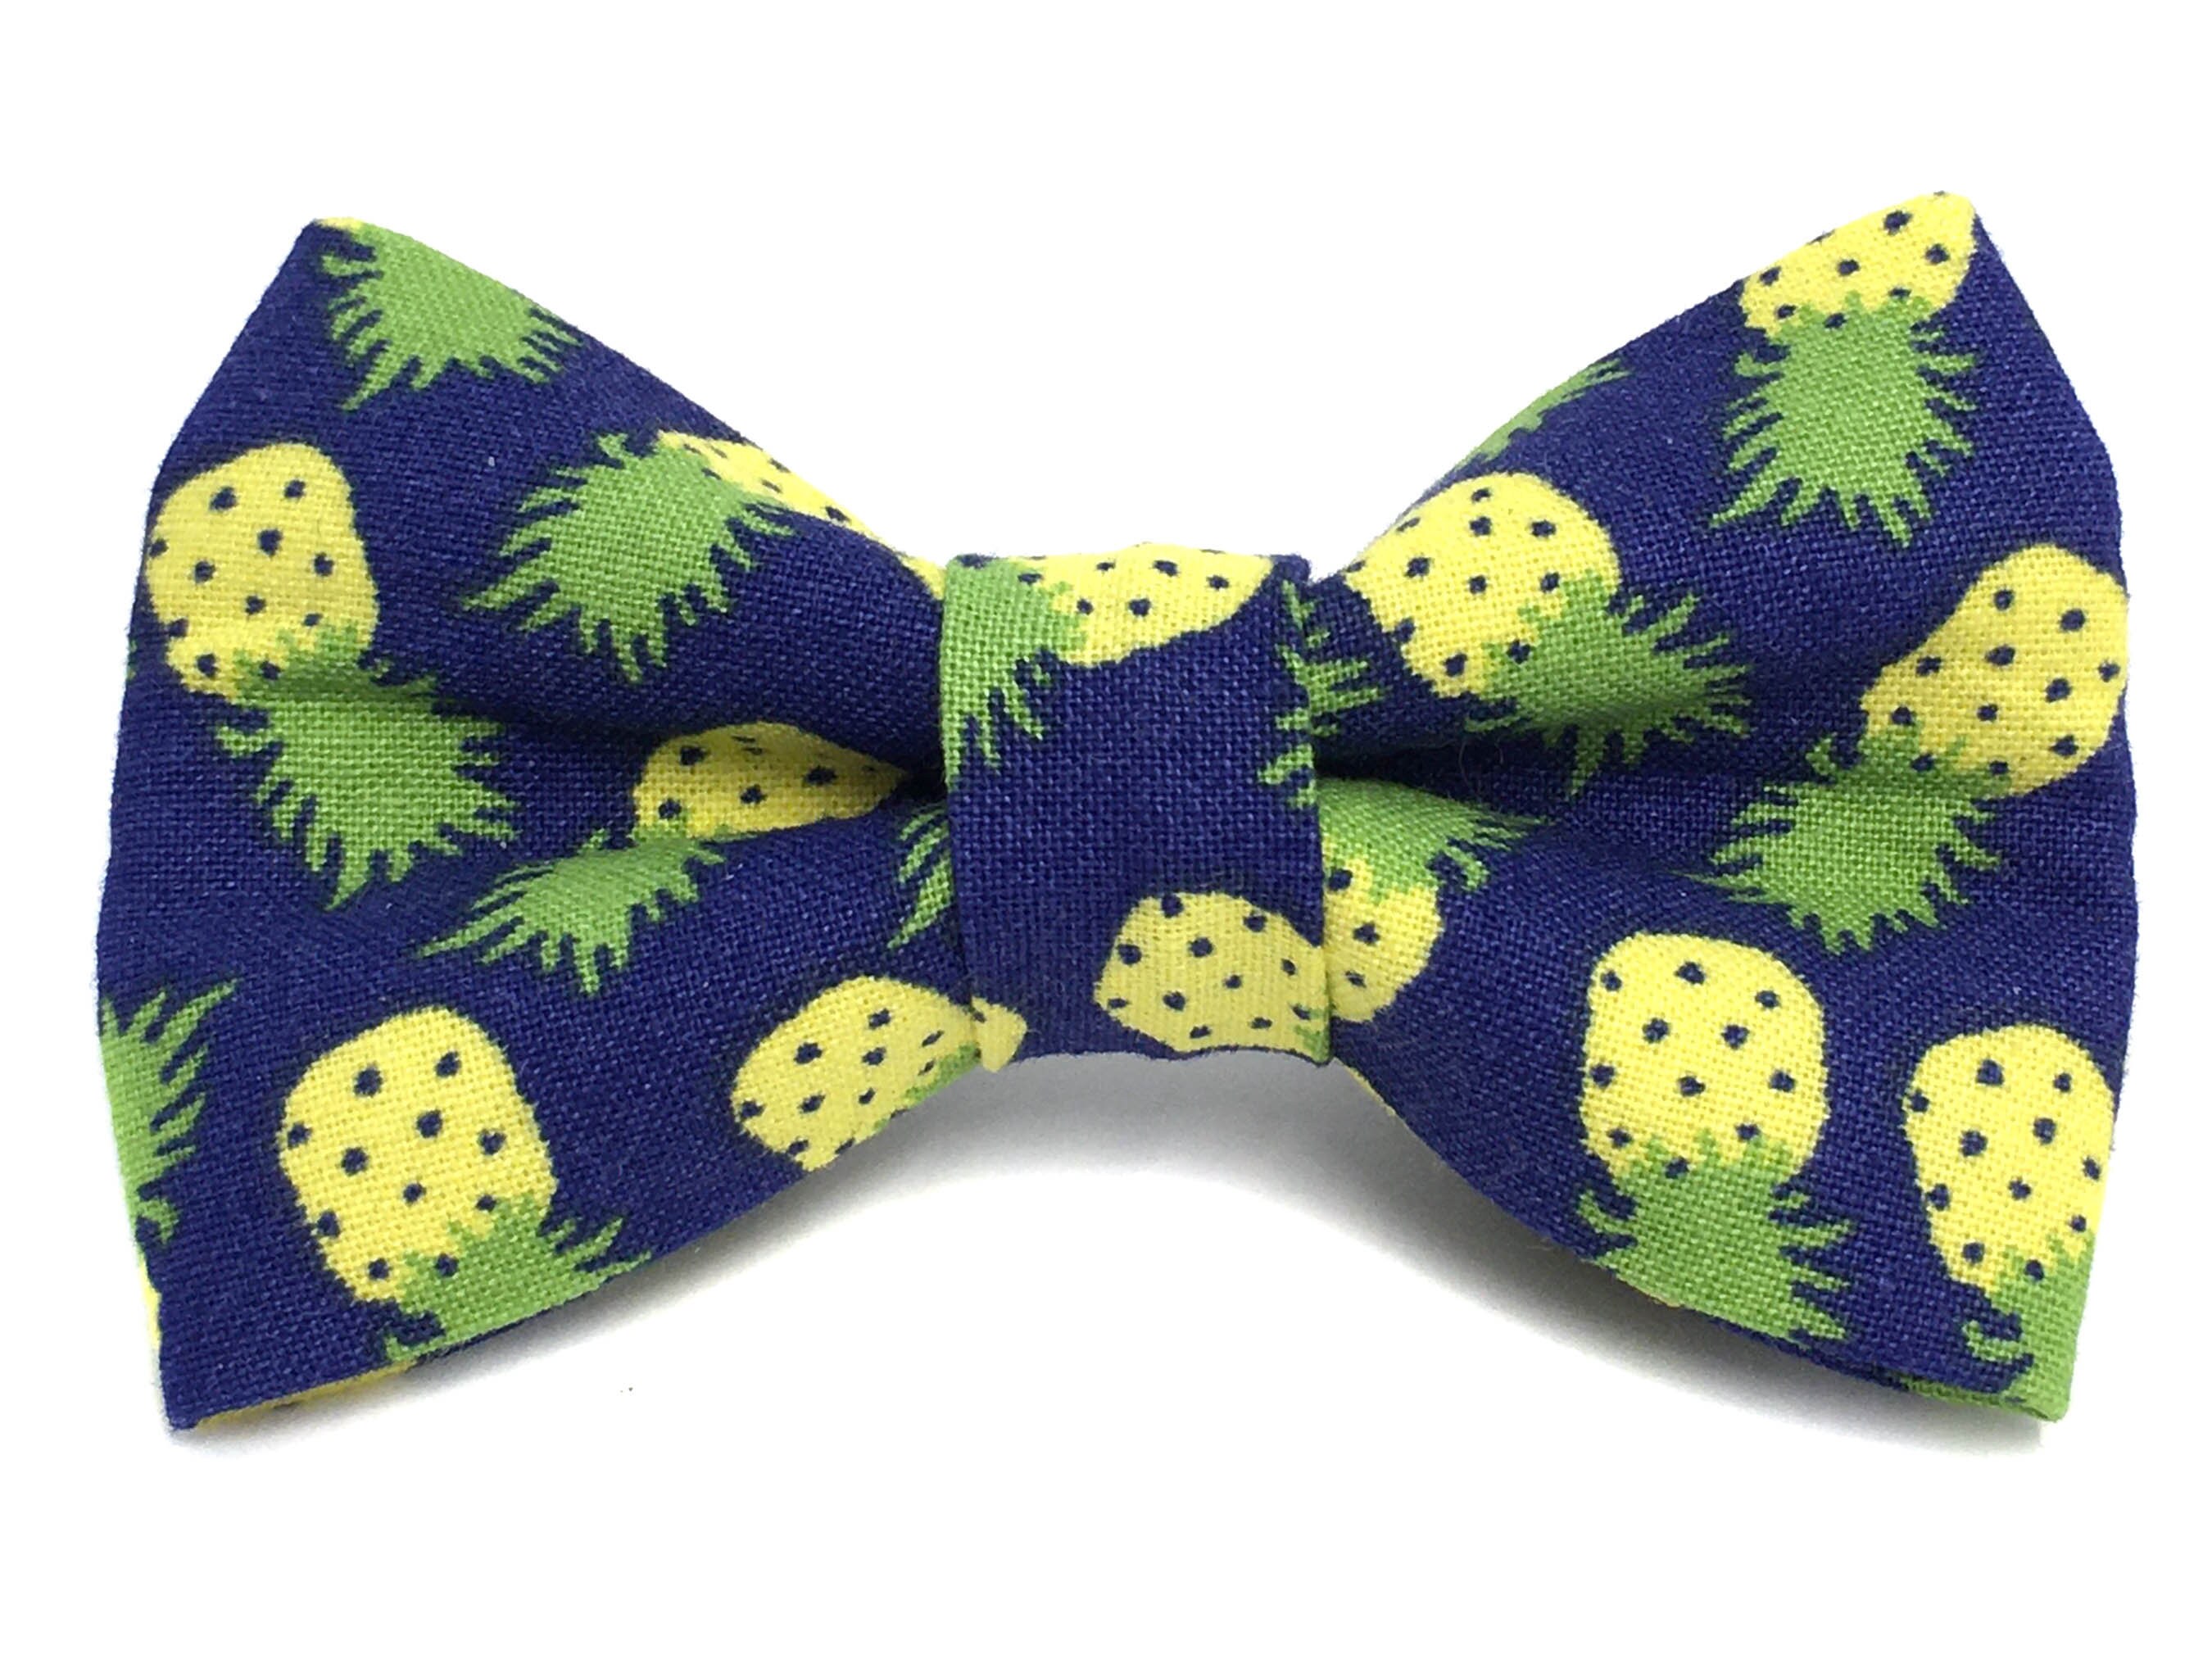 Pineapple Bow Tie Dog Collar - Pack Leashes